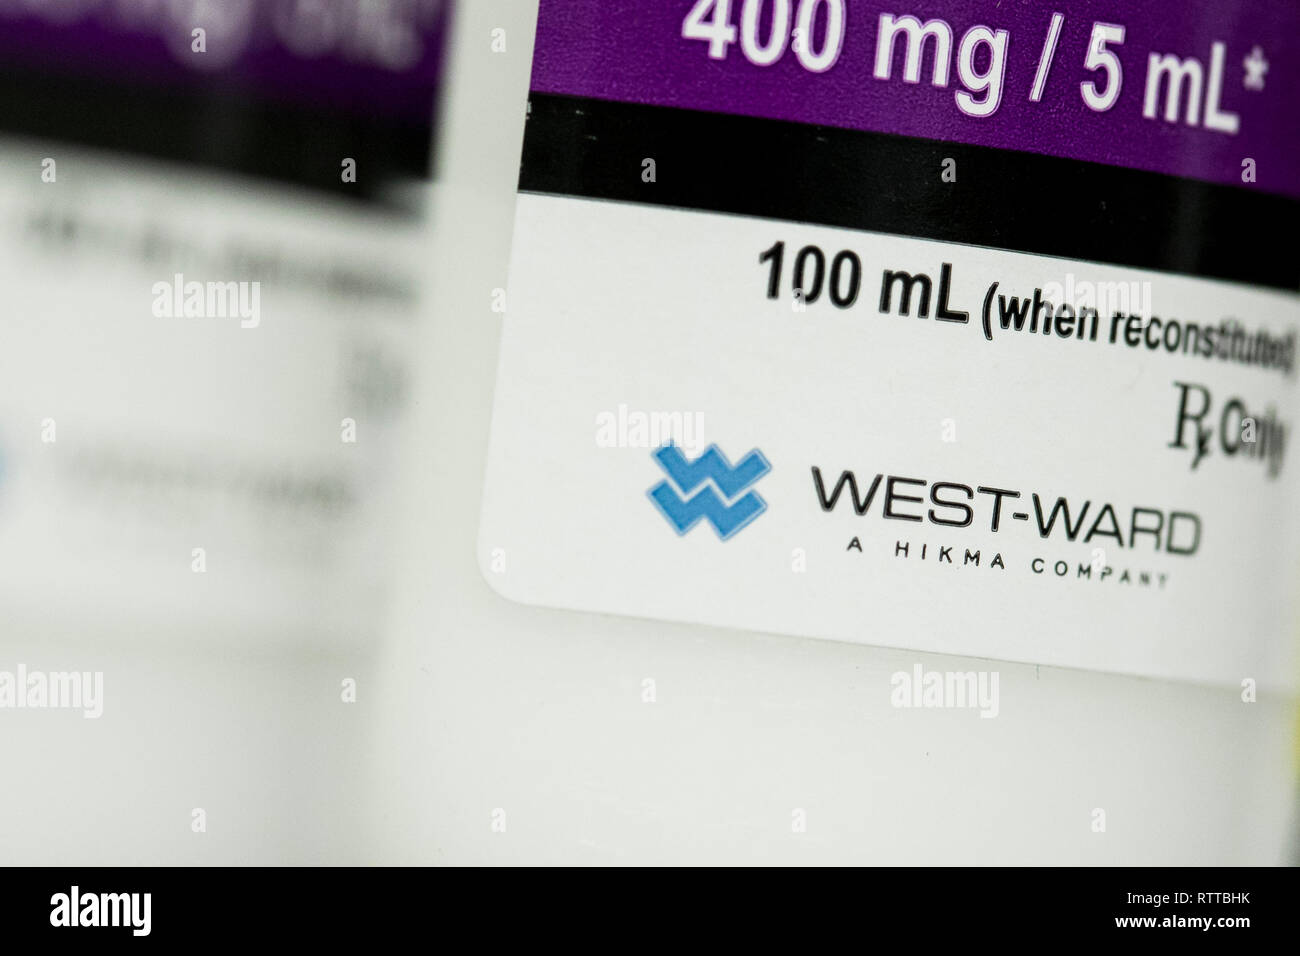 A West-Ward Pharmaceuticals logo is seen on a bottle of Amoxicillin prescription pharmaceuticals photographed in a pharmacy. Stock Photo